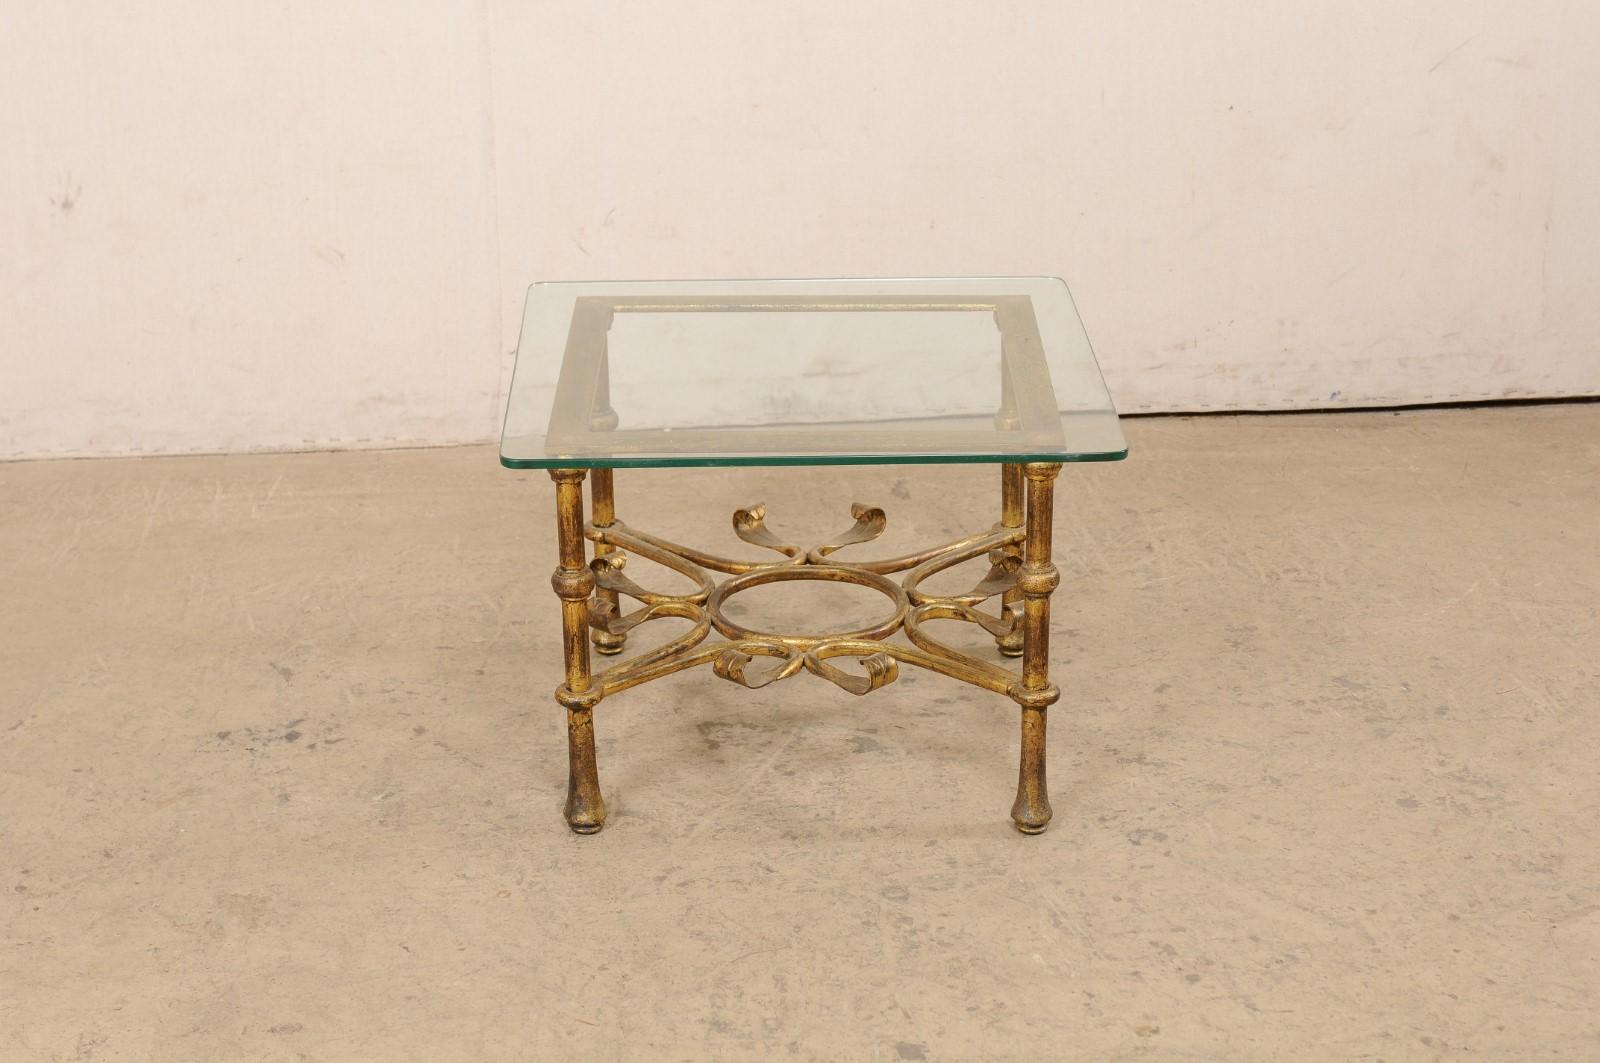 Spanish Accent Table with Gilt Iron Base & Square-Shaped Glass Top, Mid 20th C. For Sale 3